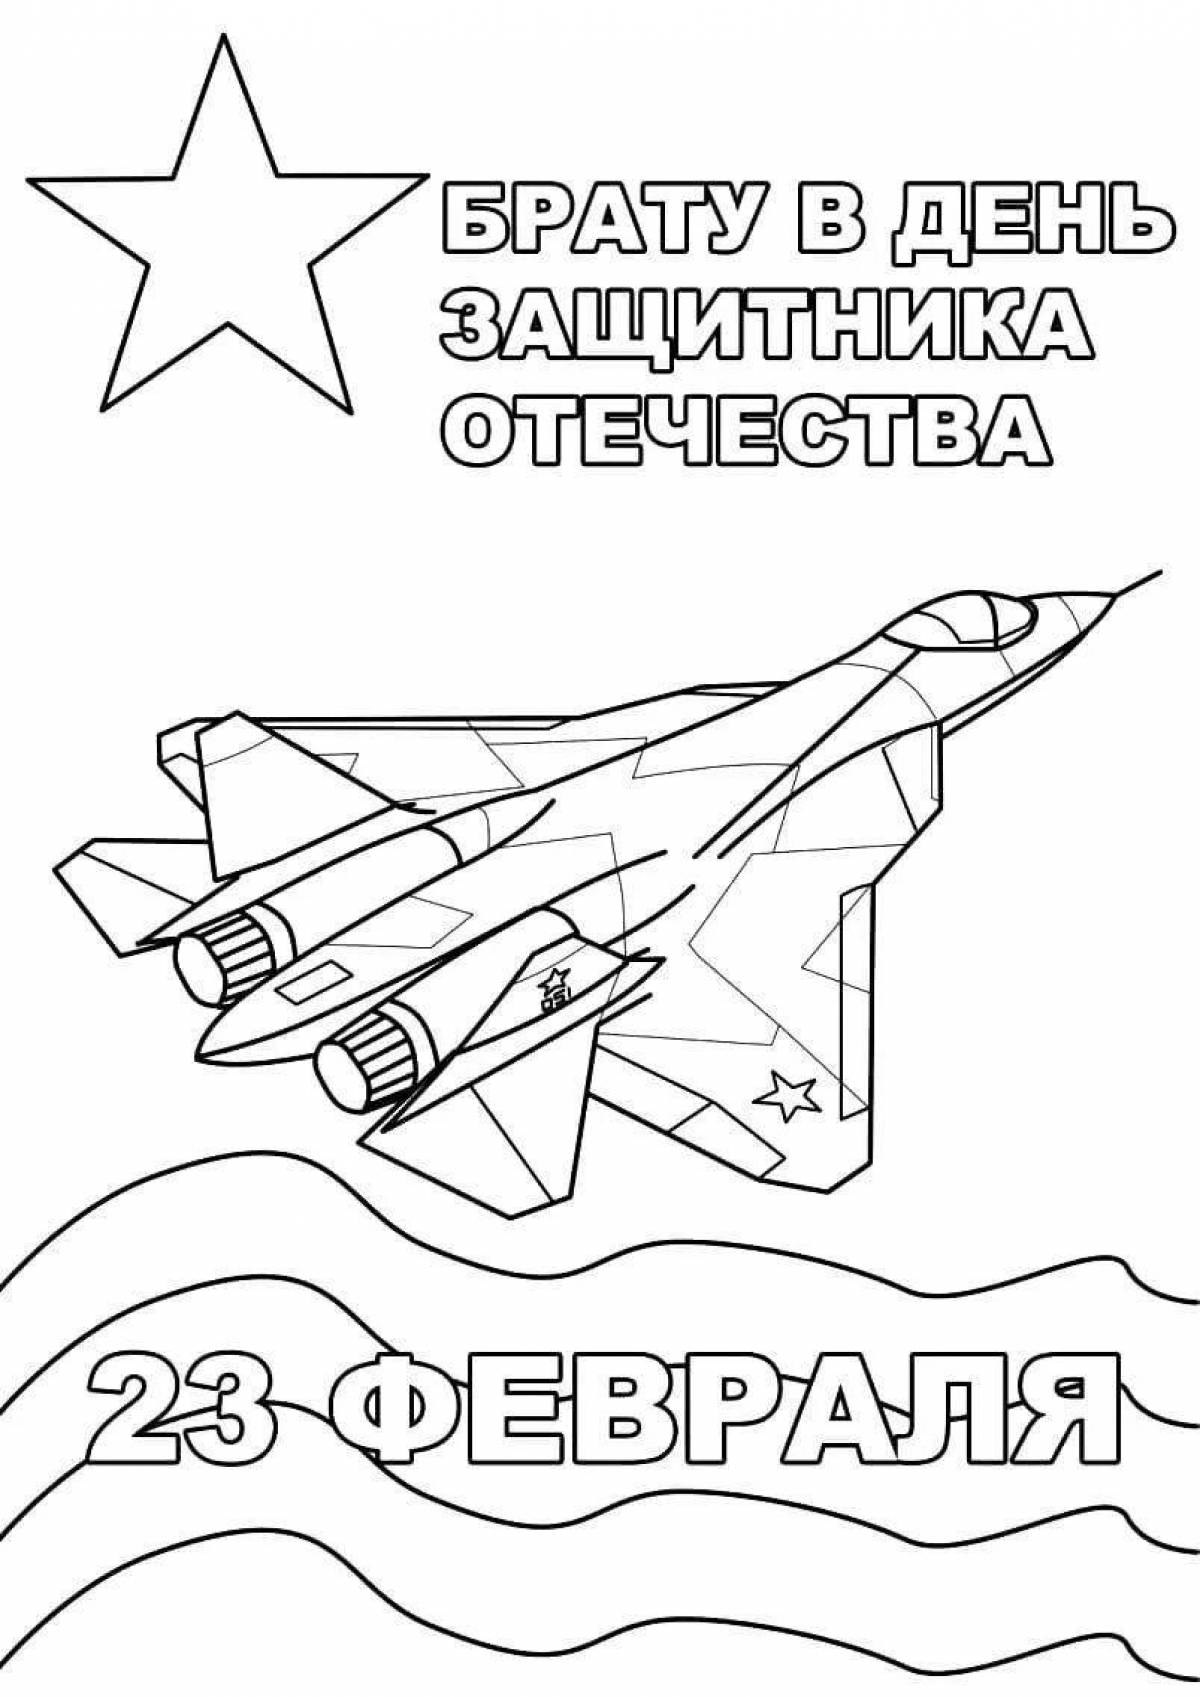 For children 23 February Defender of the Fatherland Day #2